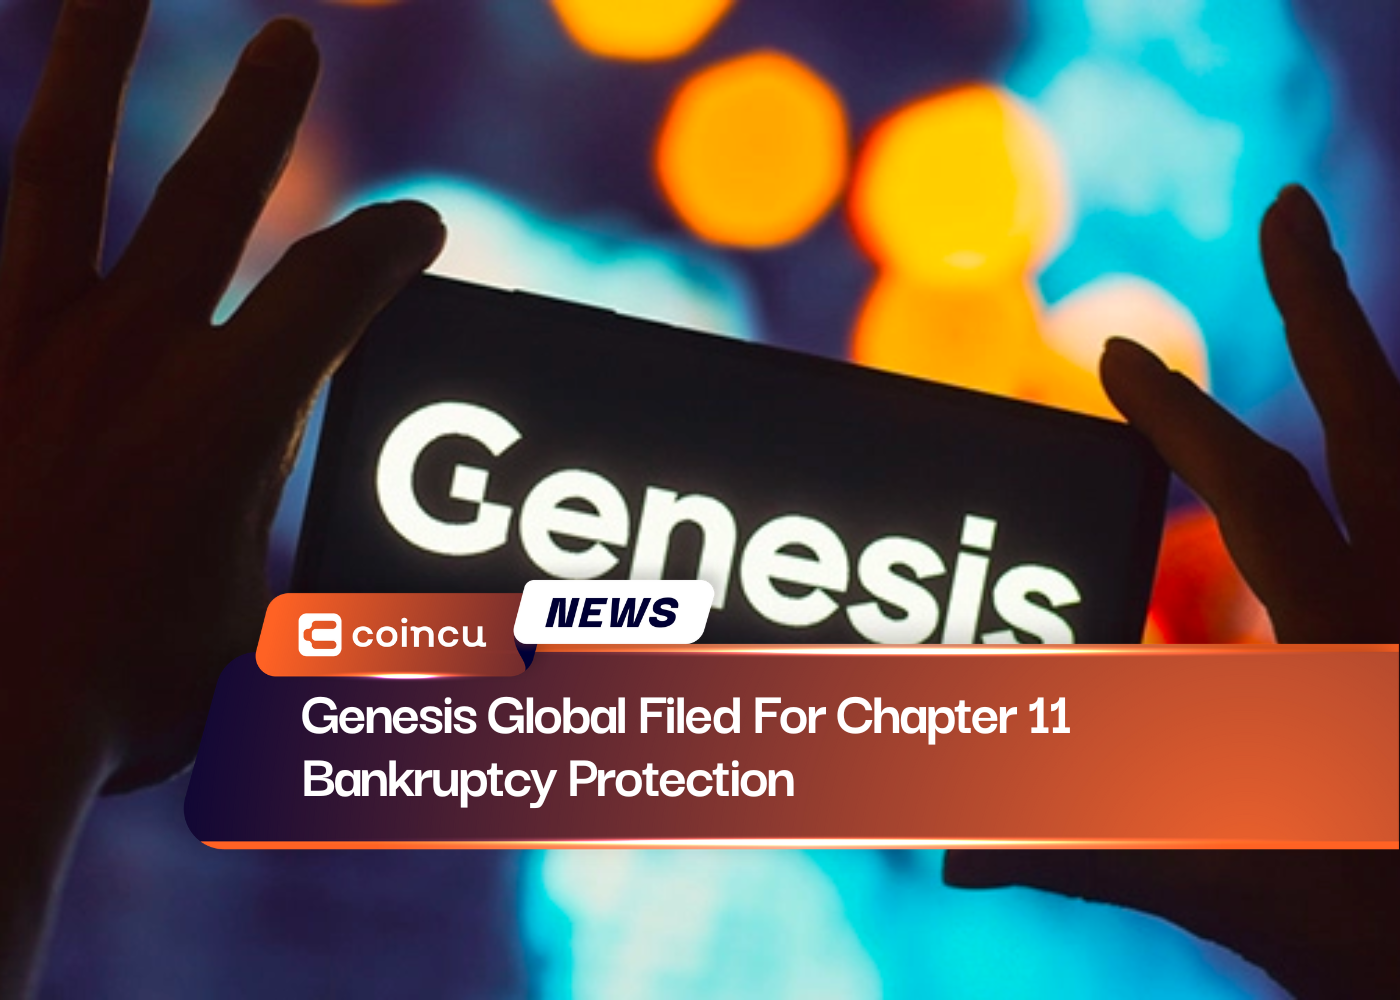 Genesis Global Filed For Chapter 11 Bankruptcy Protection